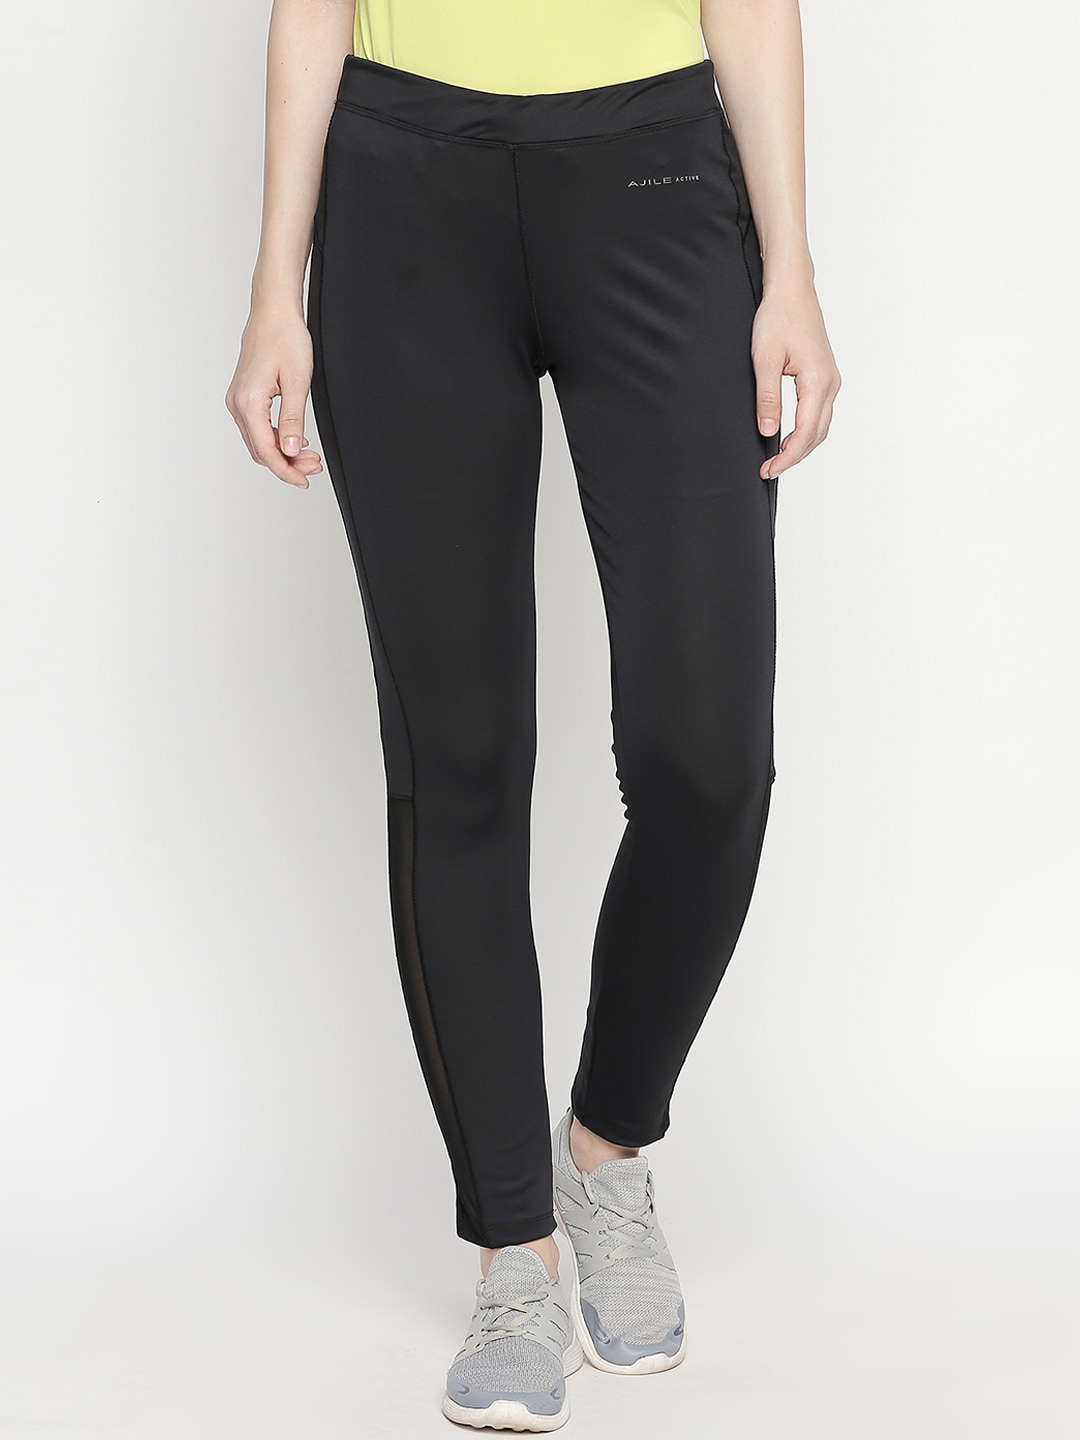 Ajile by Pantaloons Women Black Solid Slim Fit Track Pants Price in India